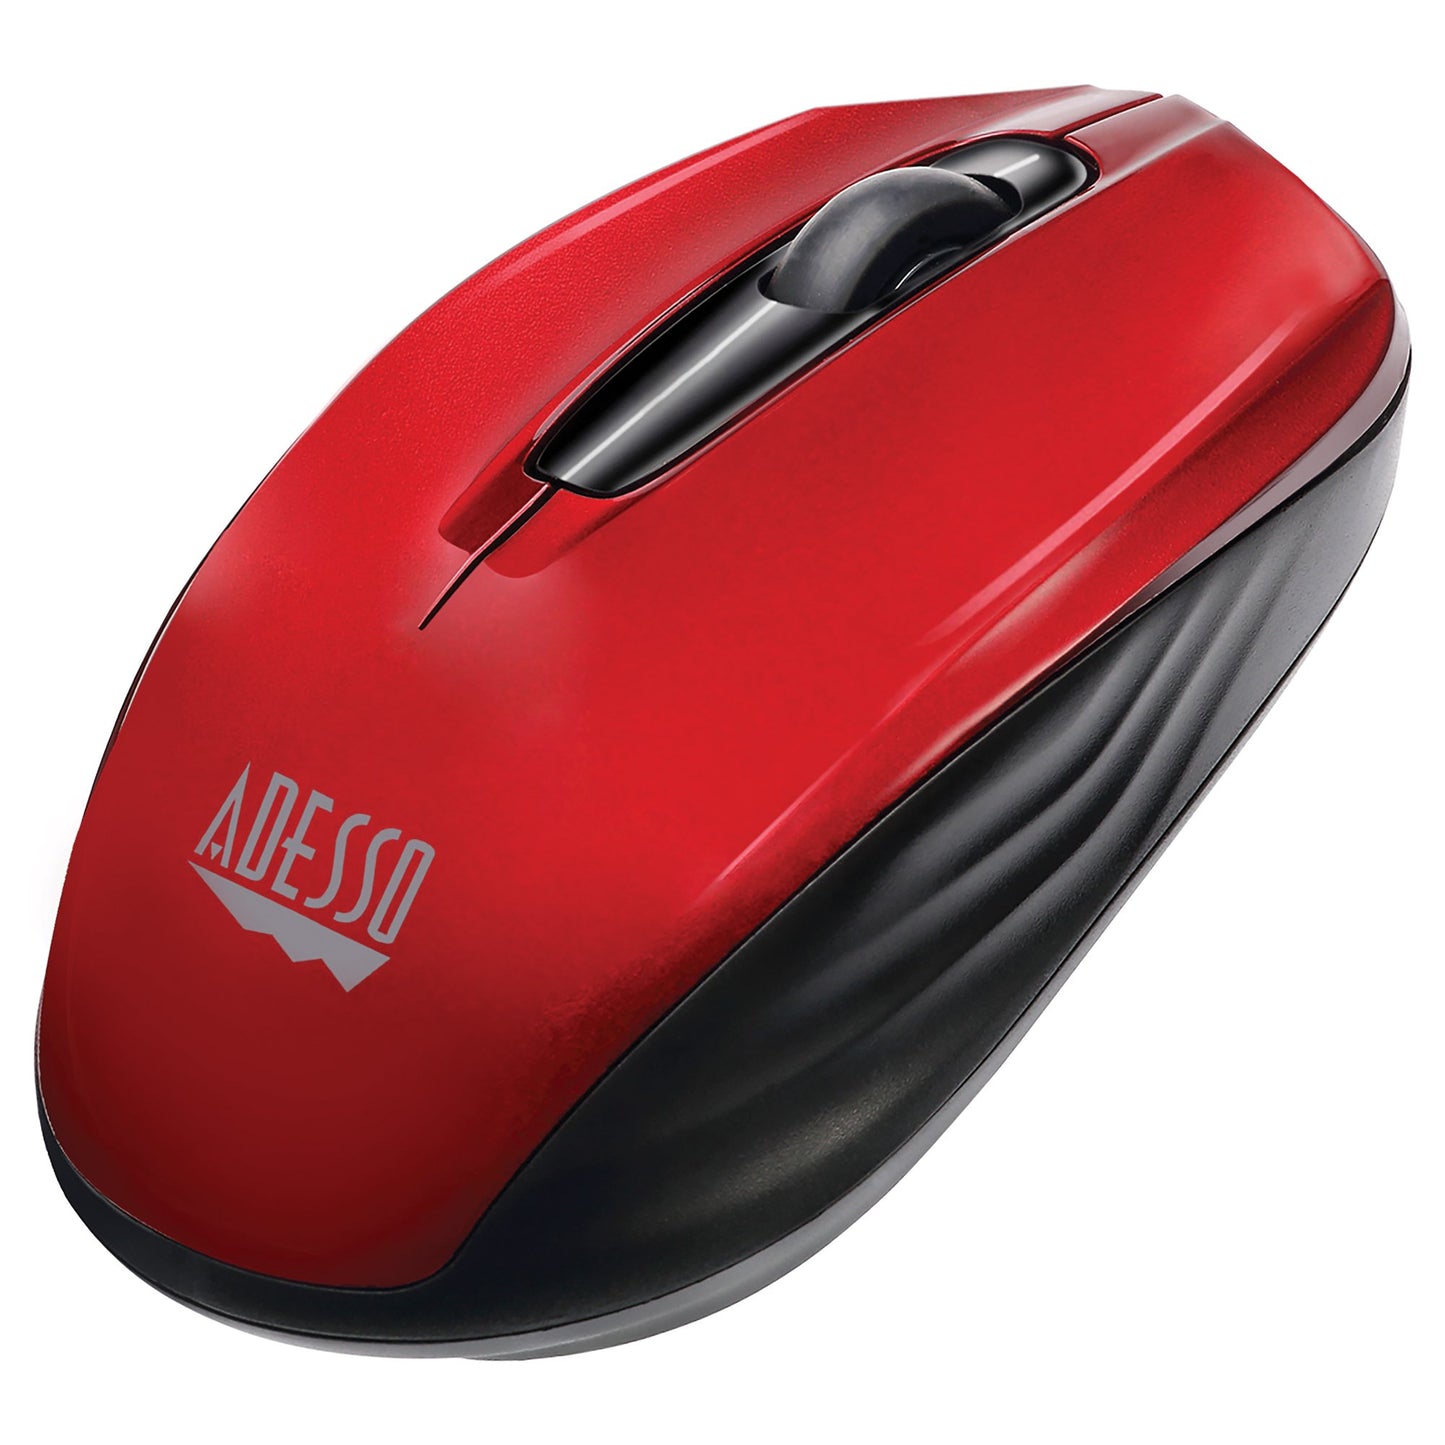 Adesso IMOUSE S50R iMouse S50 2.4 GHz Wireless Mini Mouse (Red)